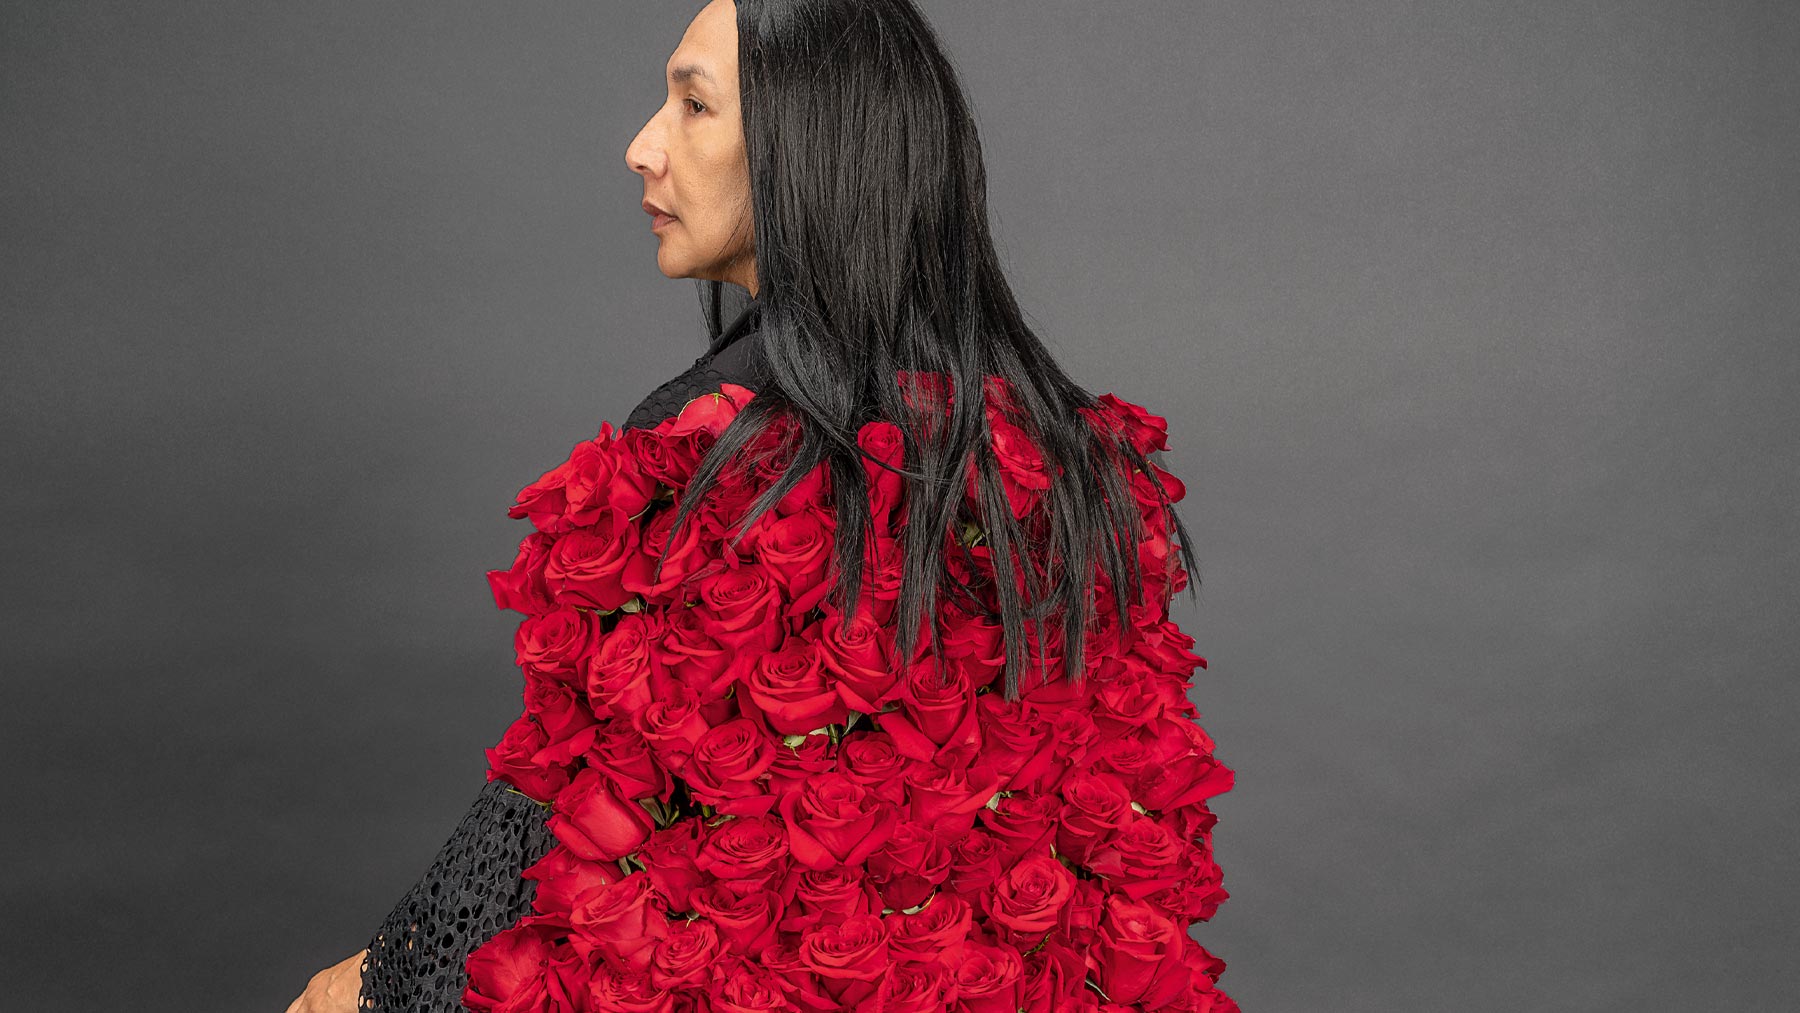 Native American woman with long hair wearing a dress made of red flowers